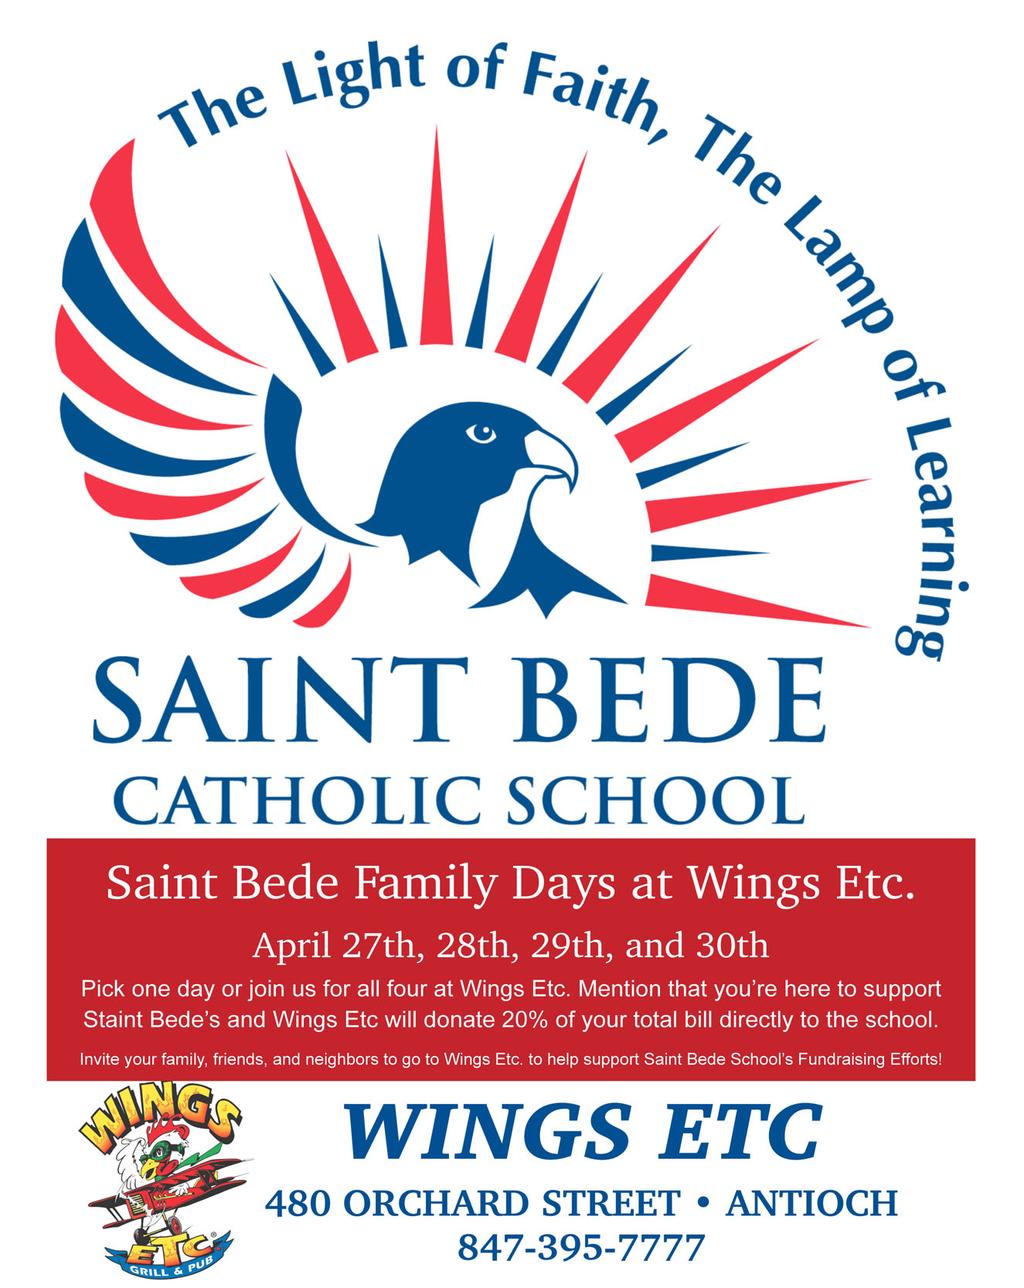 Bede Parish The Legion of Mary is now established in Ingleside through St. Bede Parish. We meet on Thursdays from 7:00-8:30 PM in the Faith Formation Center Conference Room.